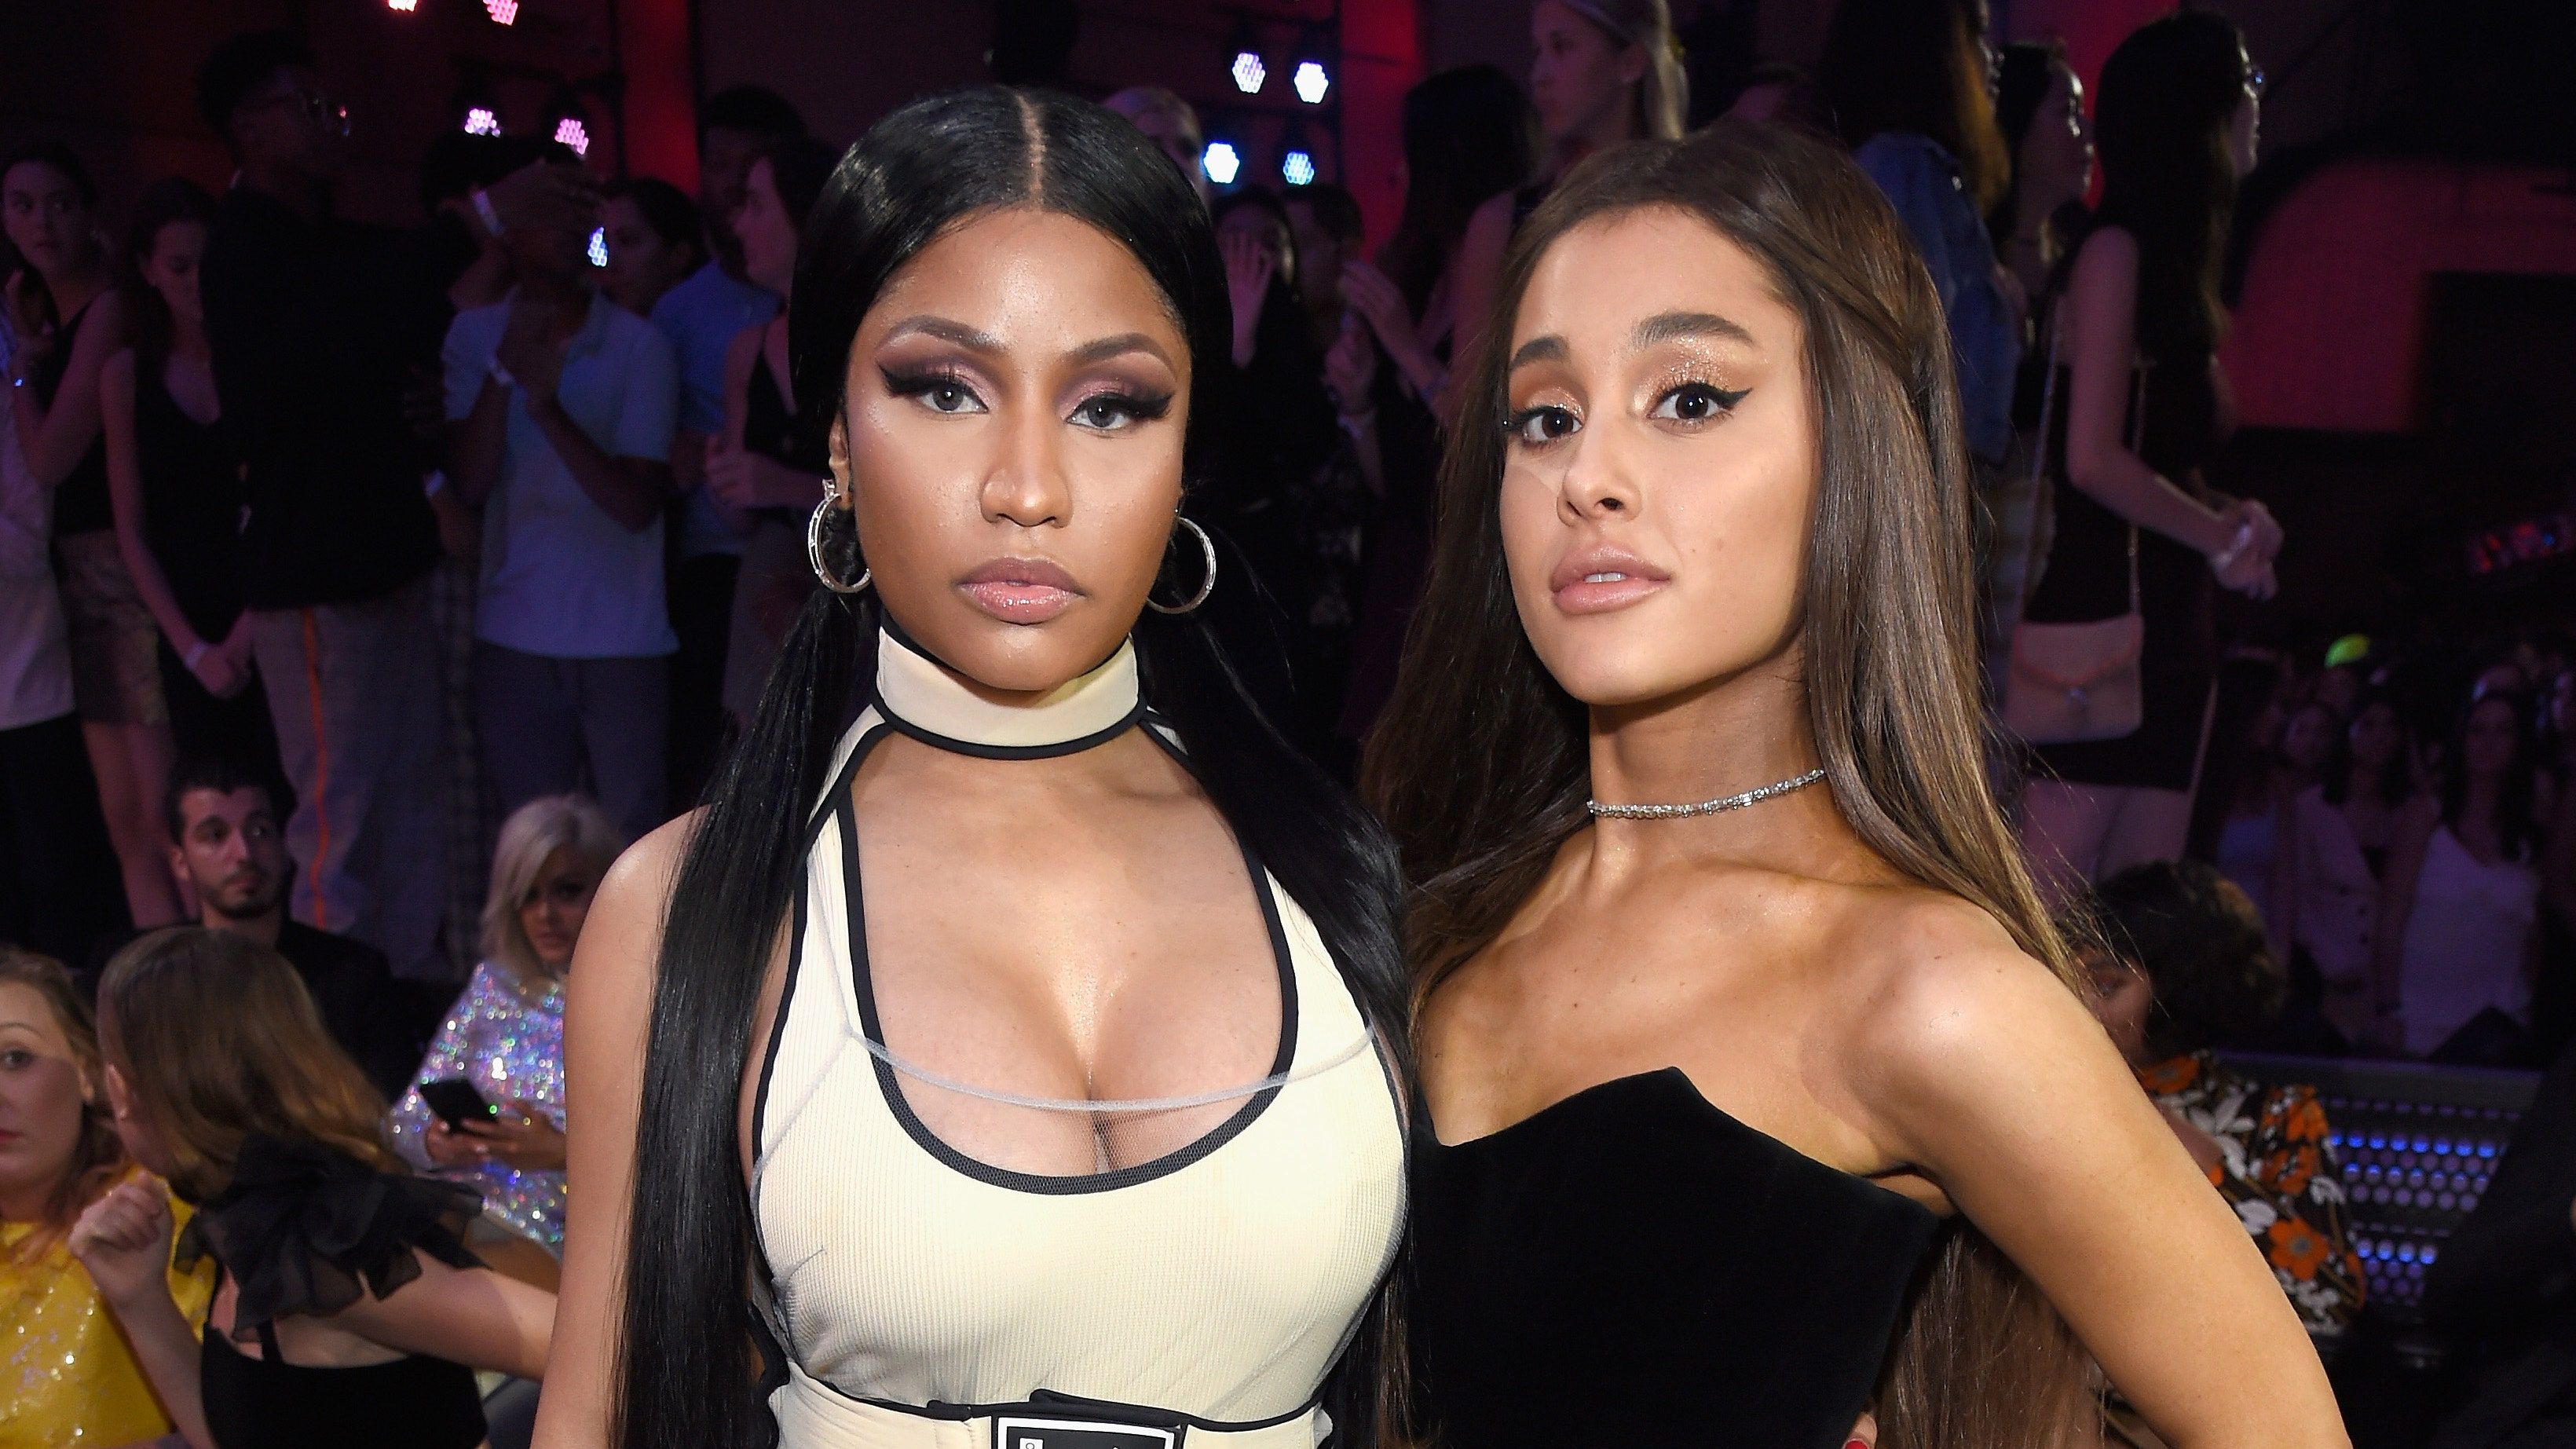 What Were Ariana Grande and Nicki Minaj Whispering About at the VMAs? An Investigation